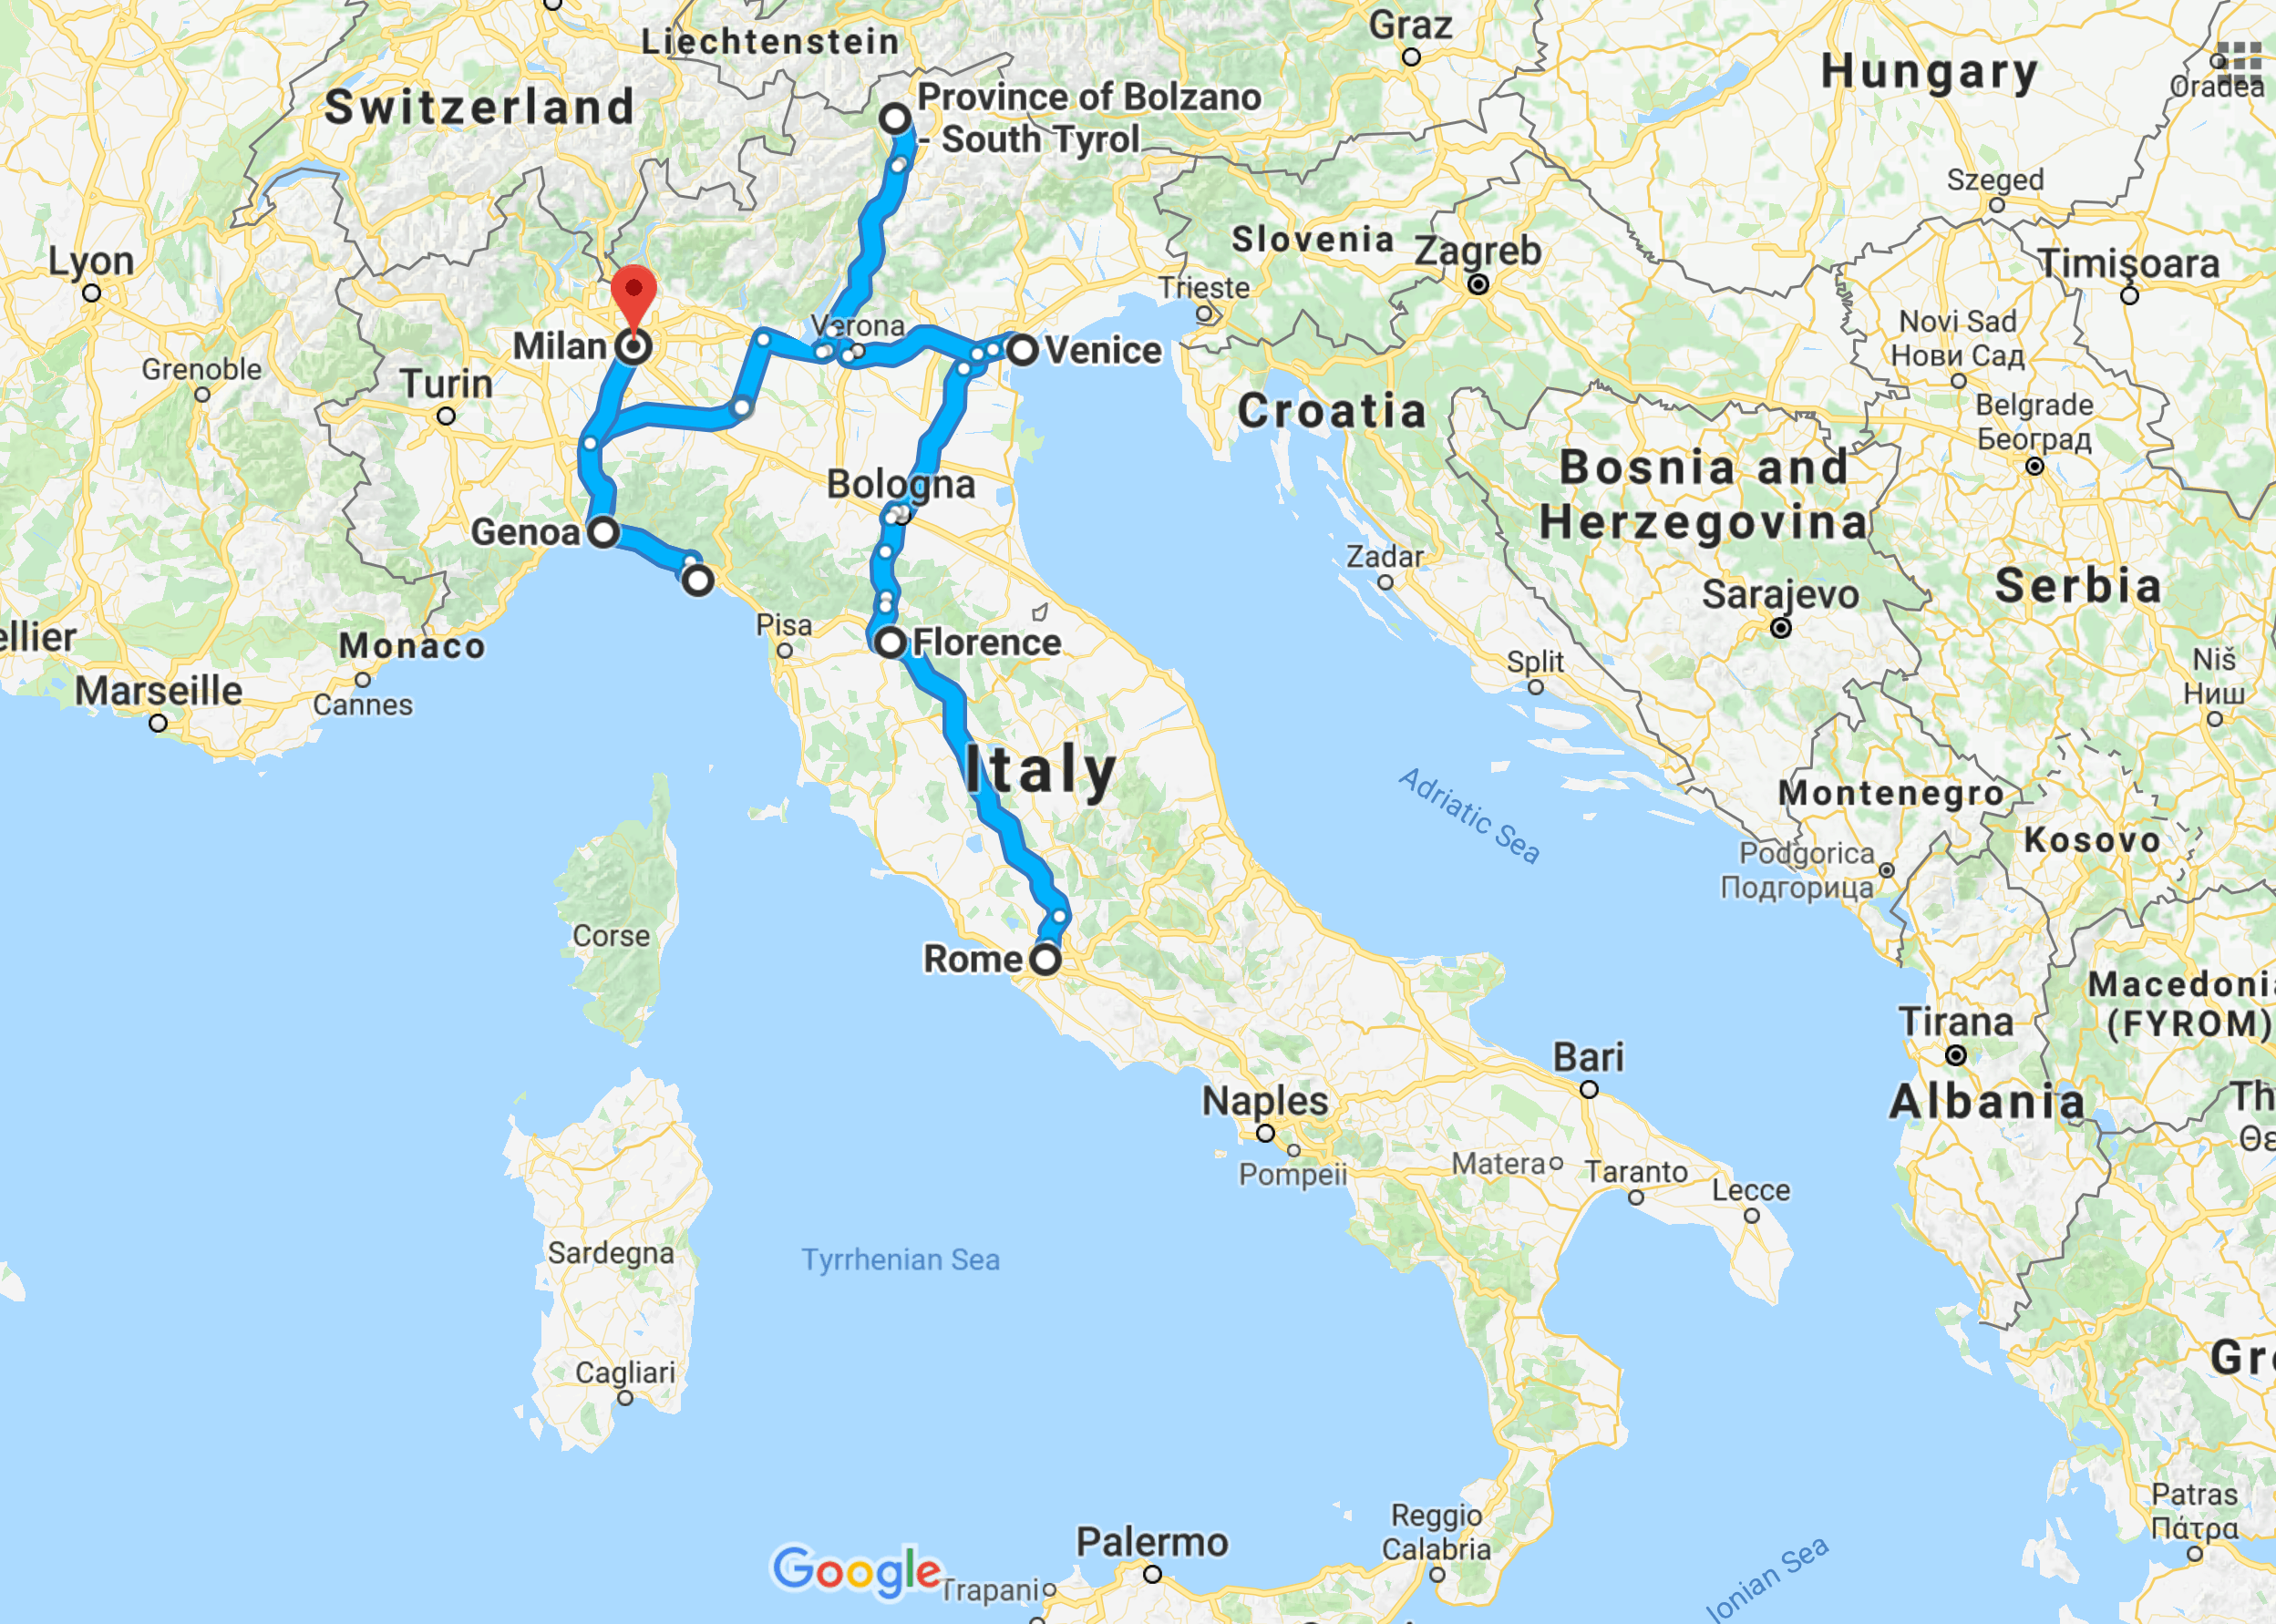 Google Maps screenshot of Italy showing the Italy road trip itinerary route.